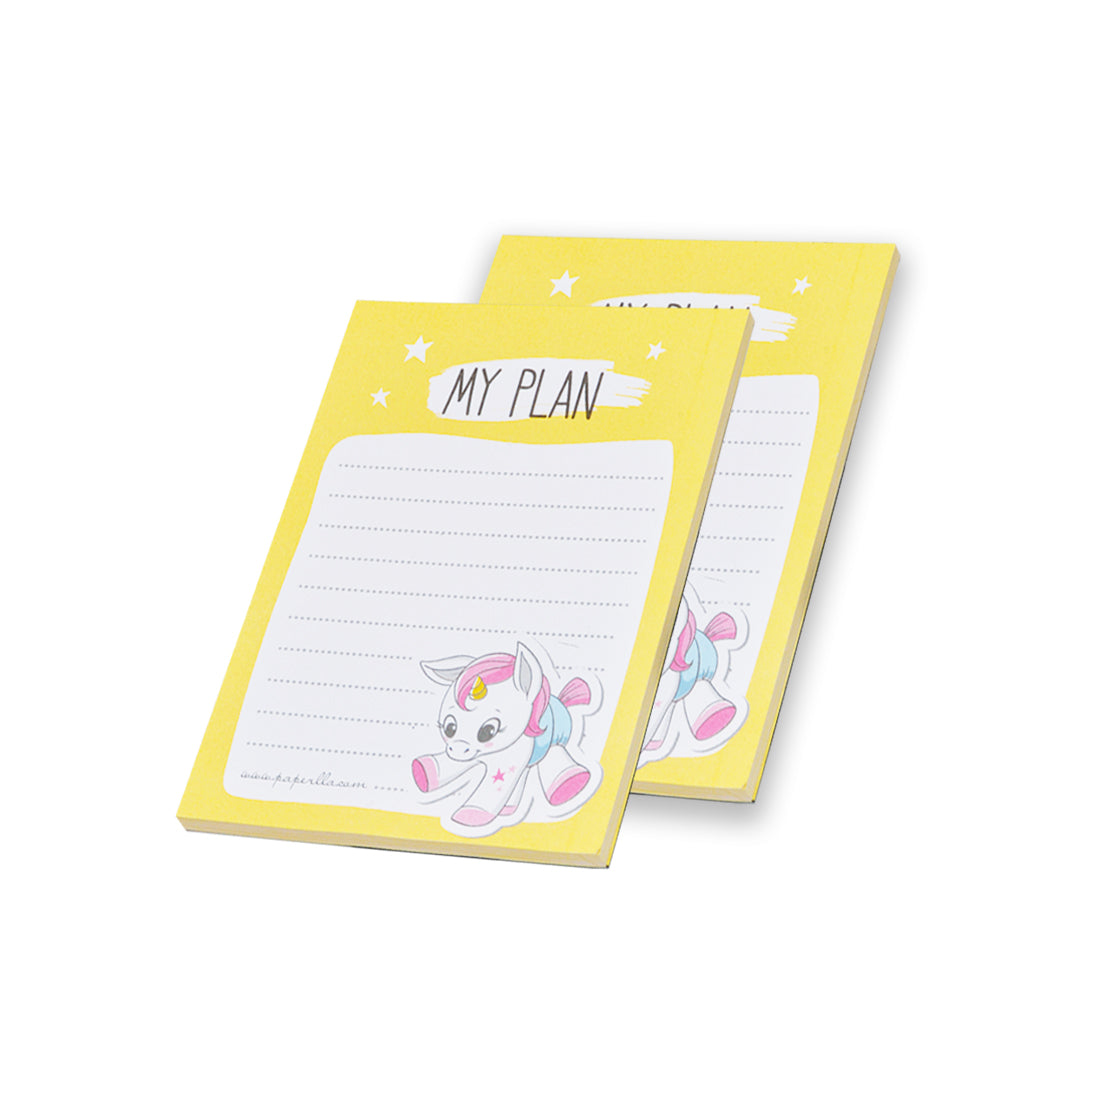 Buy WRITING PADS DIARY NOTEPADS, TO DO LIST PLANNEER, passport holder online